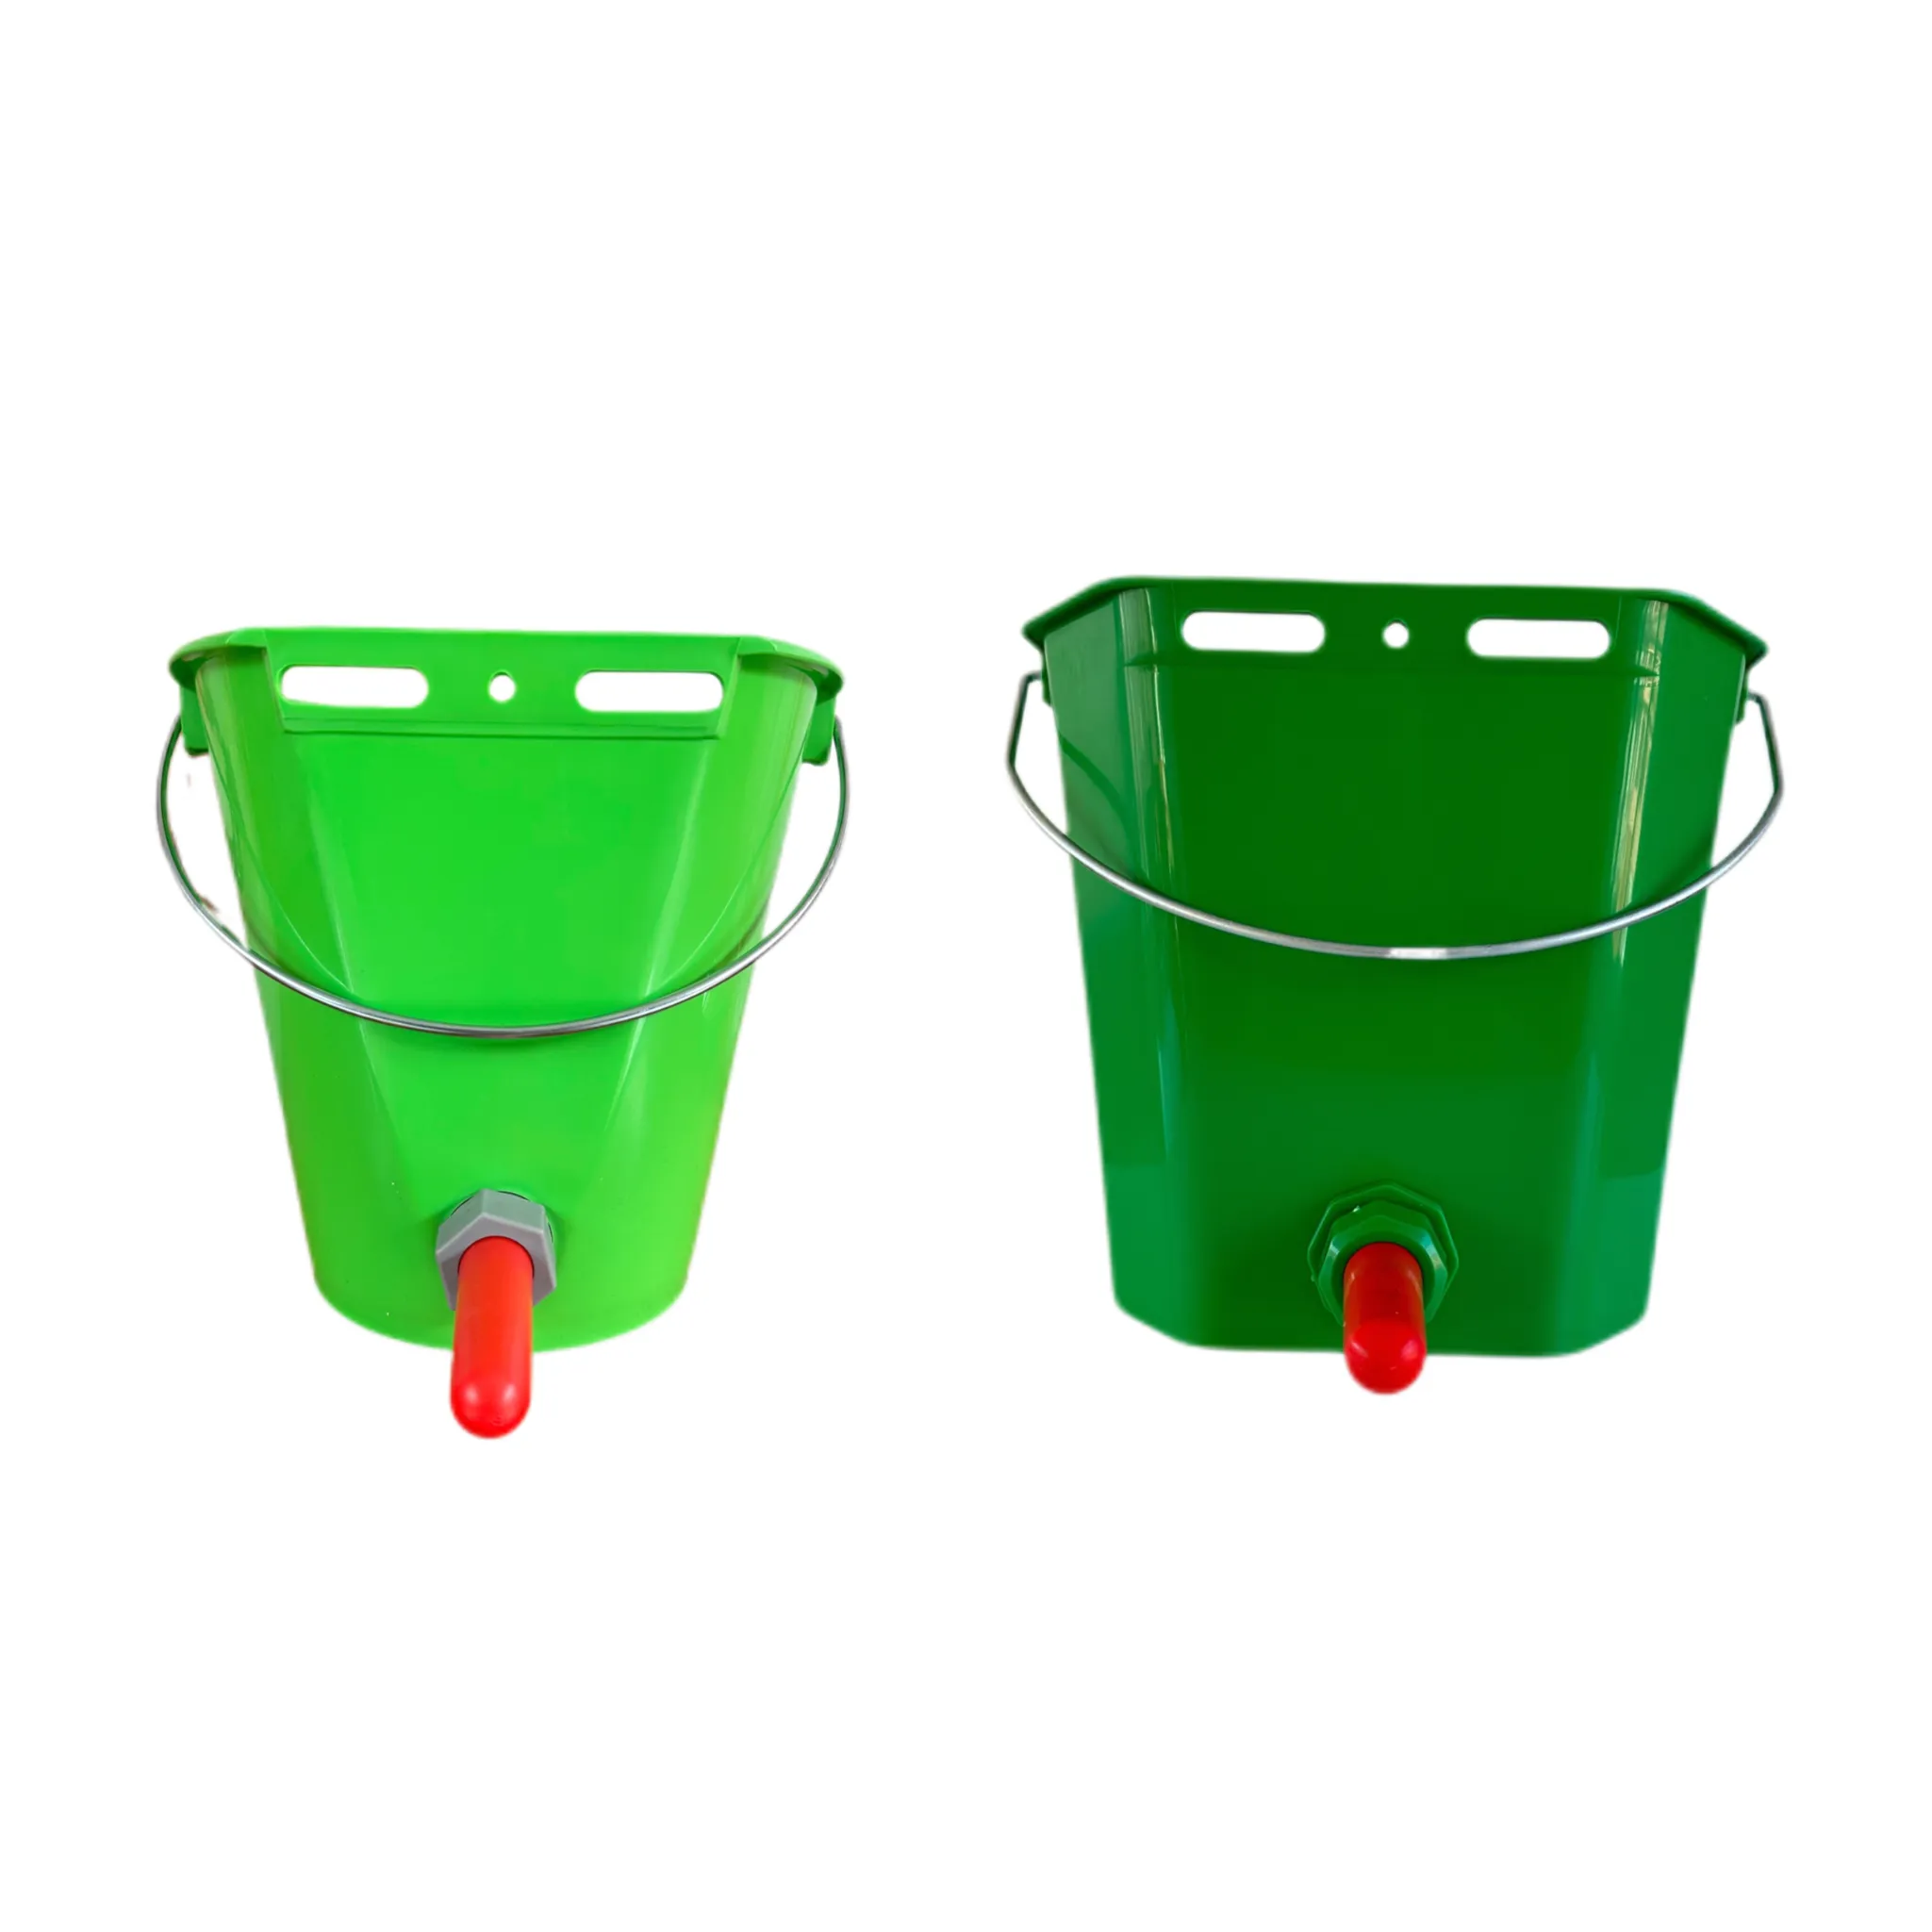 Factory prices 8L and 12L calf feeding buckets with a pacifier for raising calves and lambs